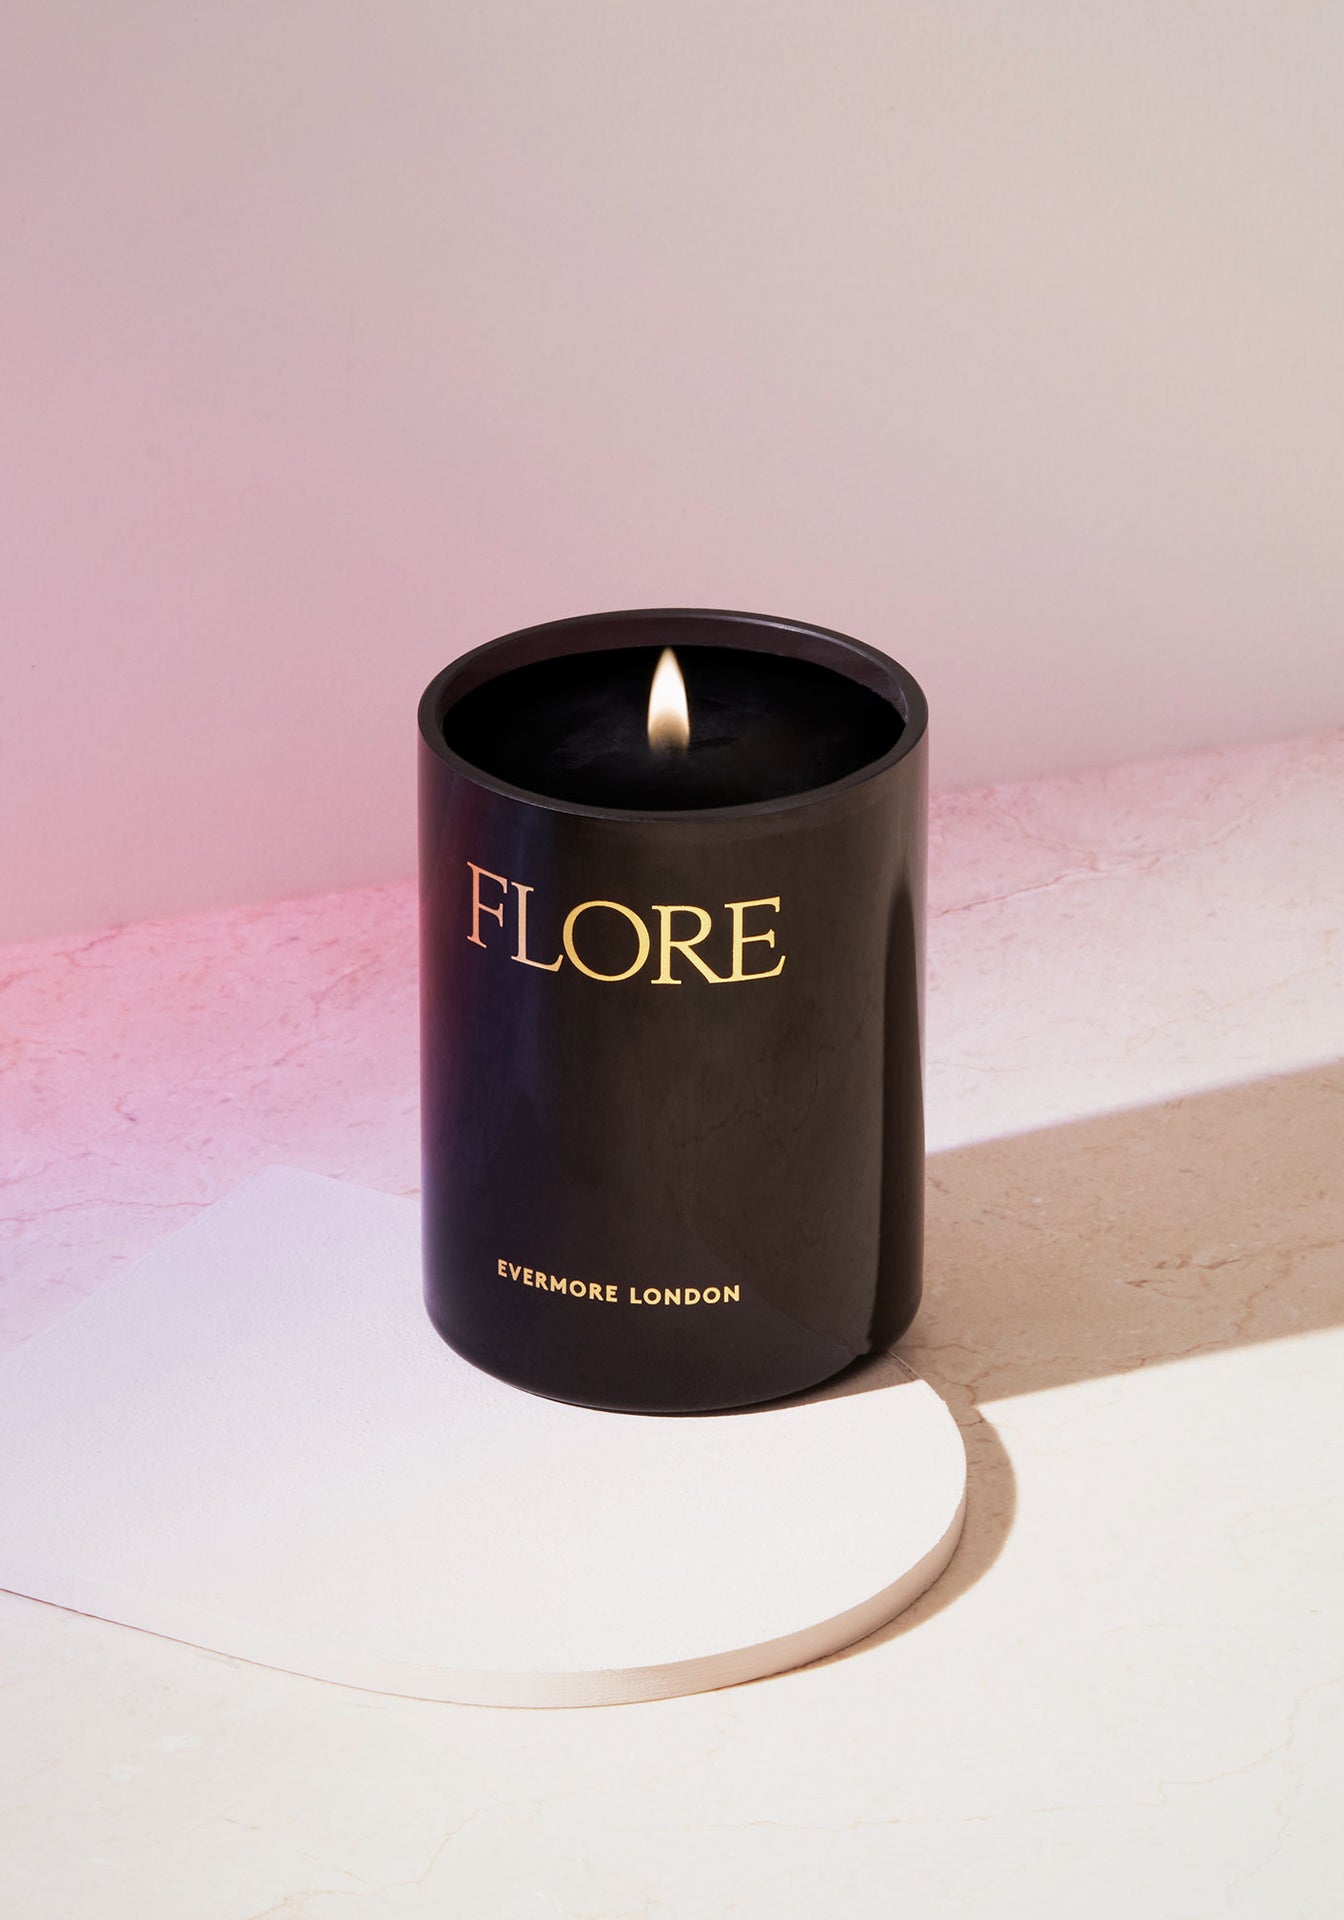 Flore Mist + Lilac Blossom Candle